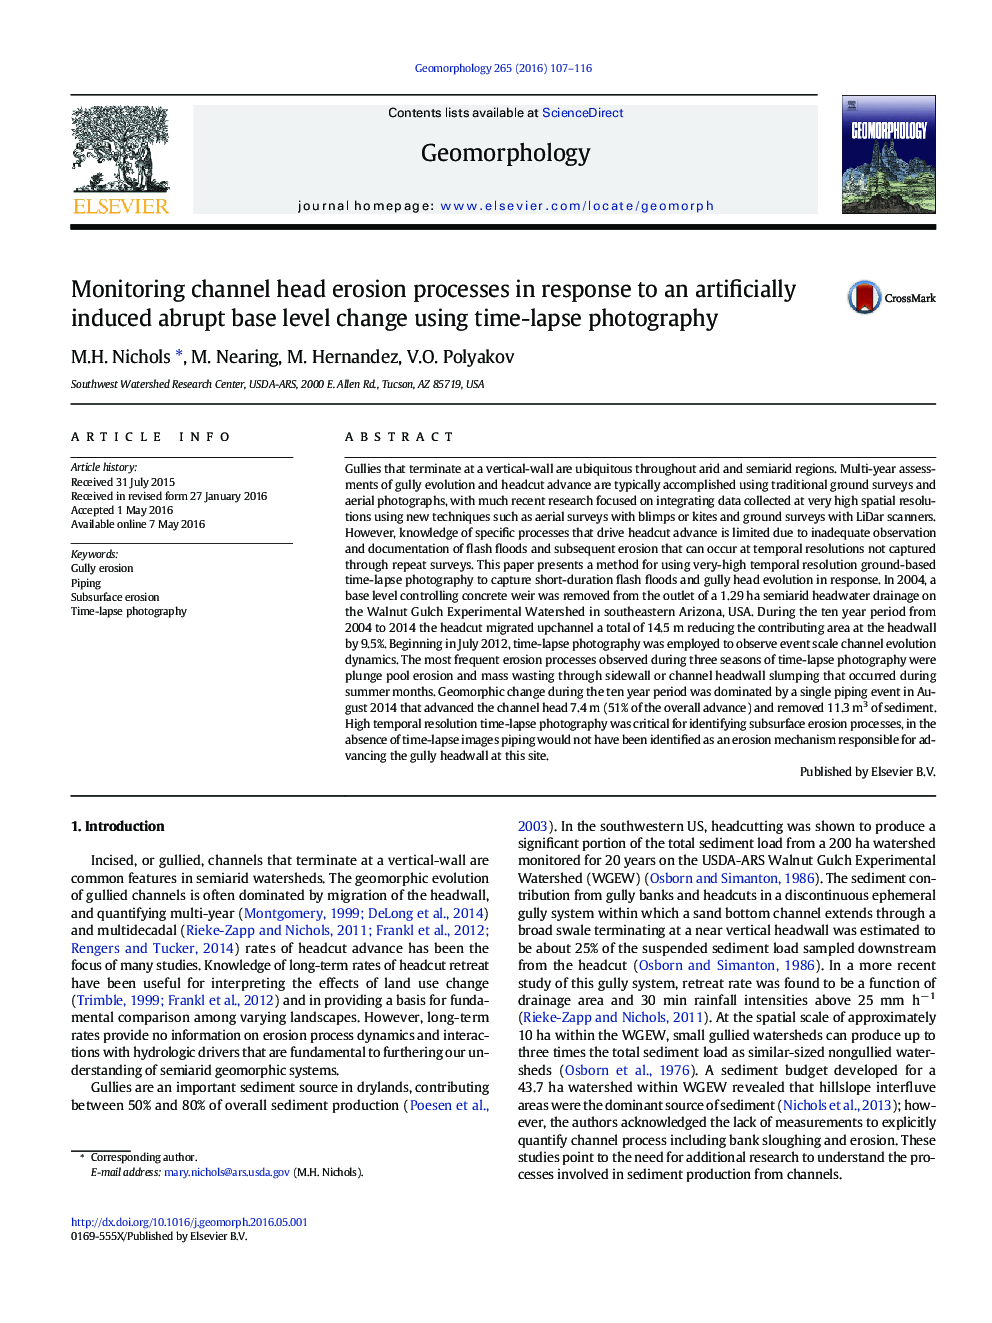 Monitoring channel head erosion processes in response to an artificially induced abrupt base level change using time-lapse photography